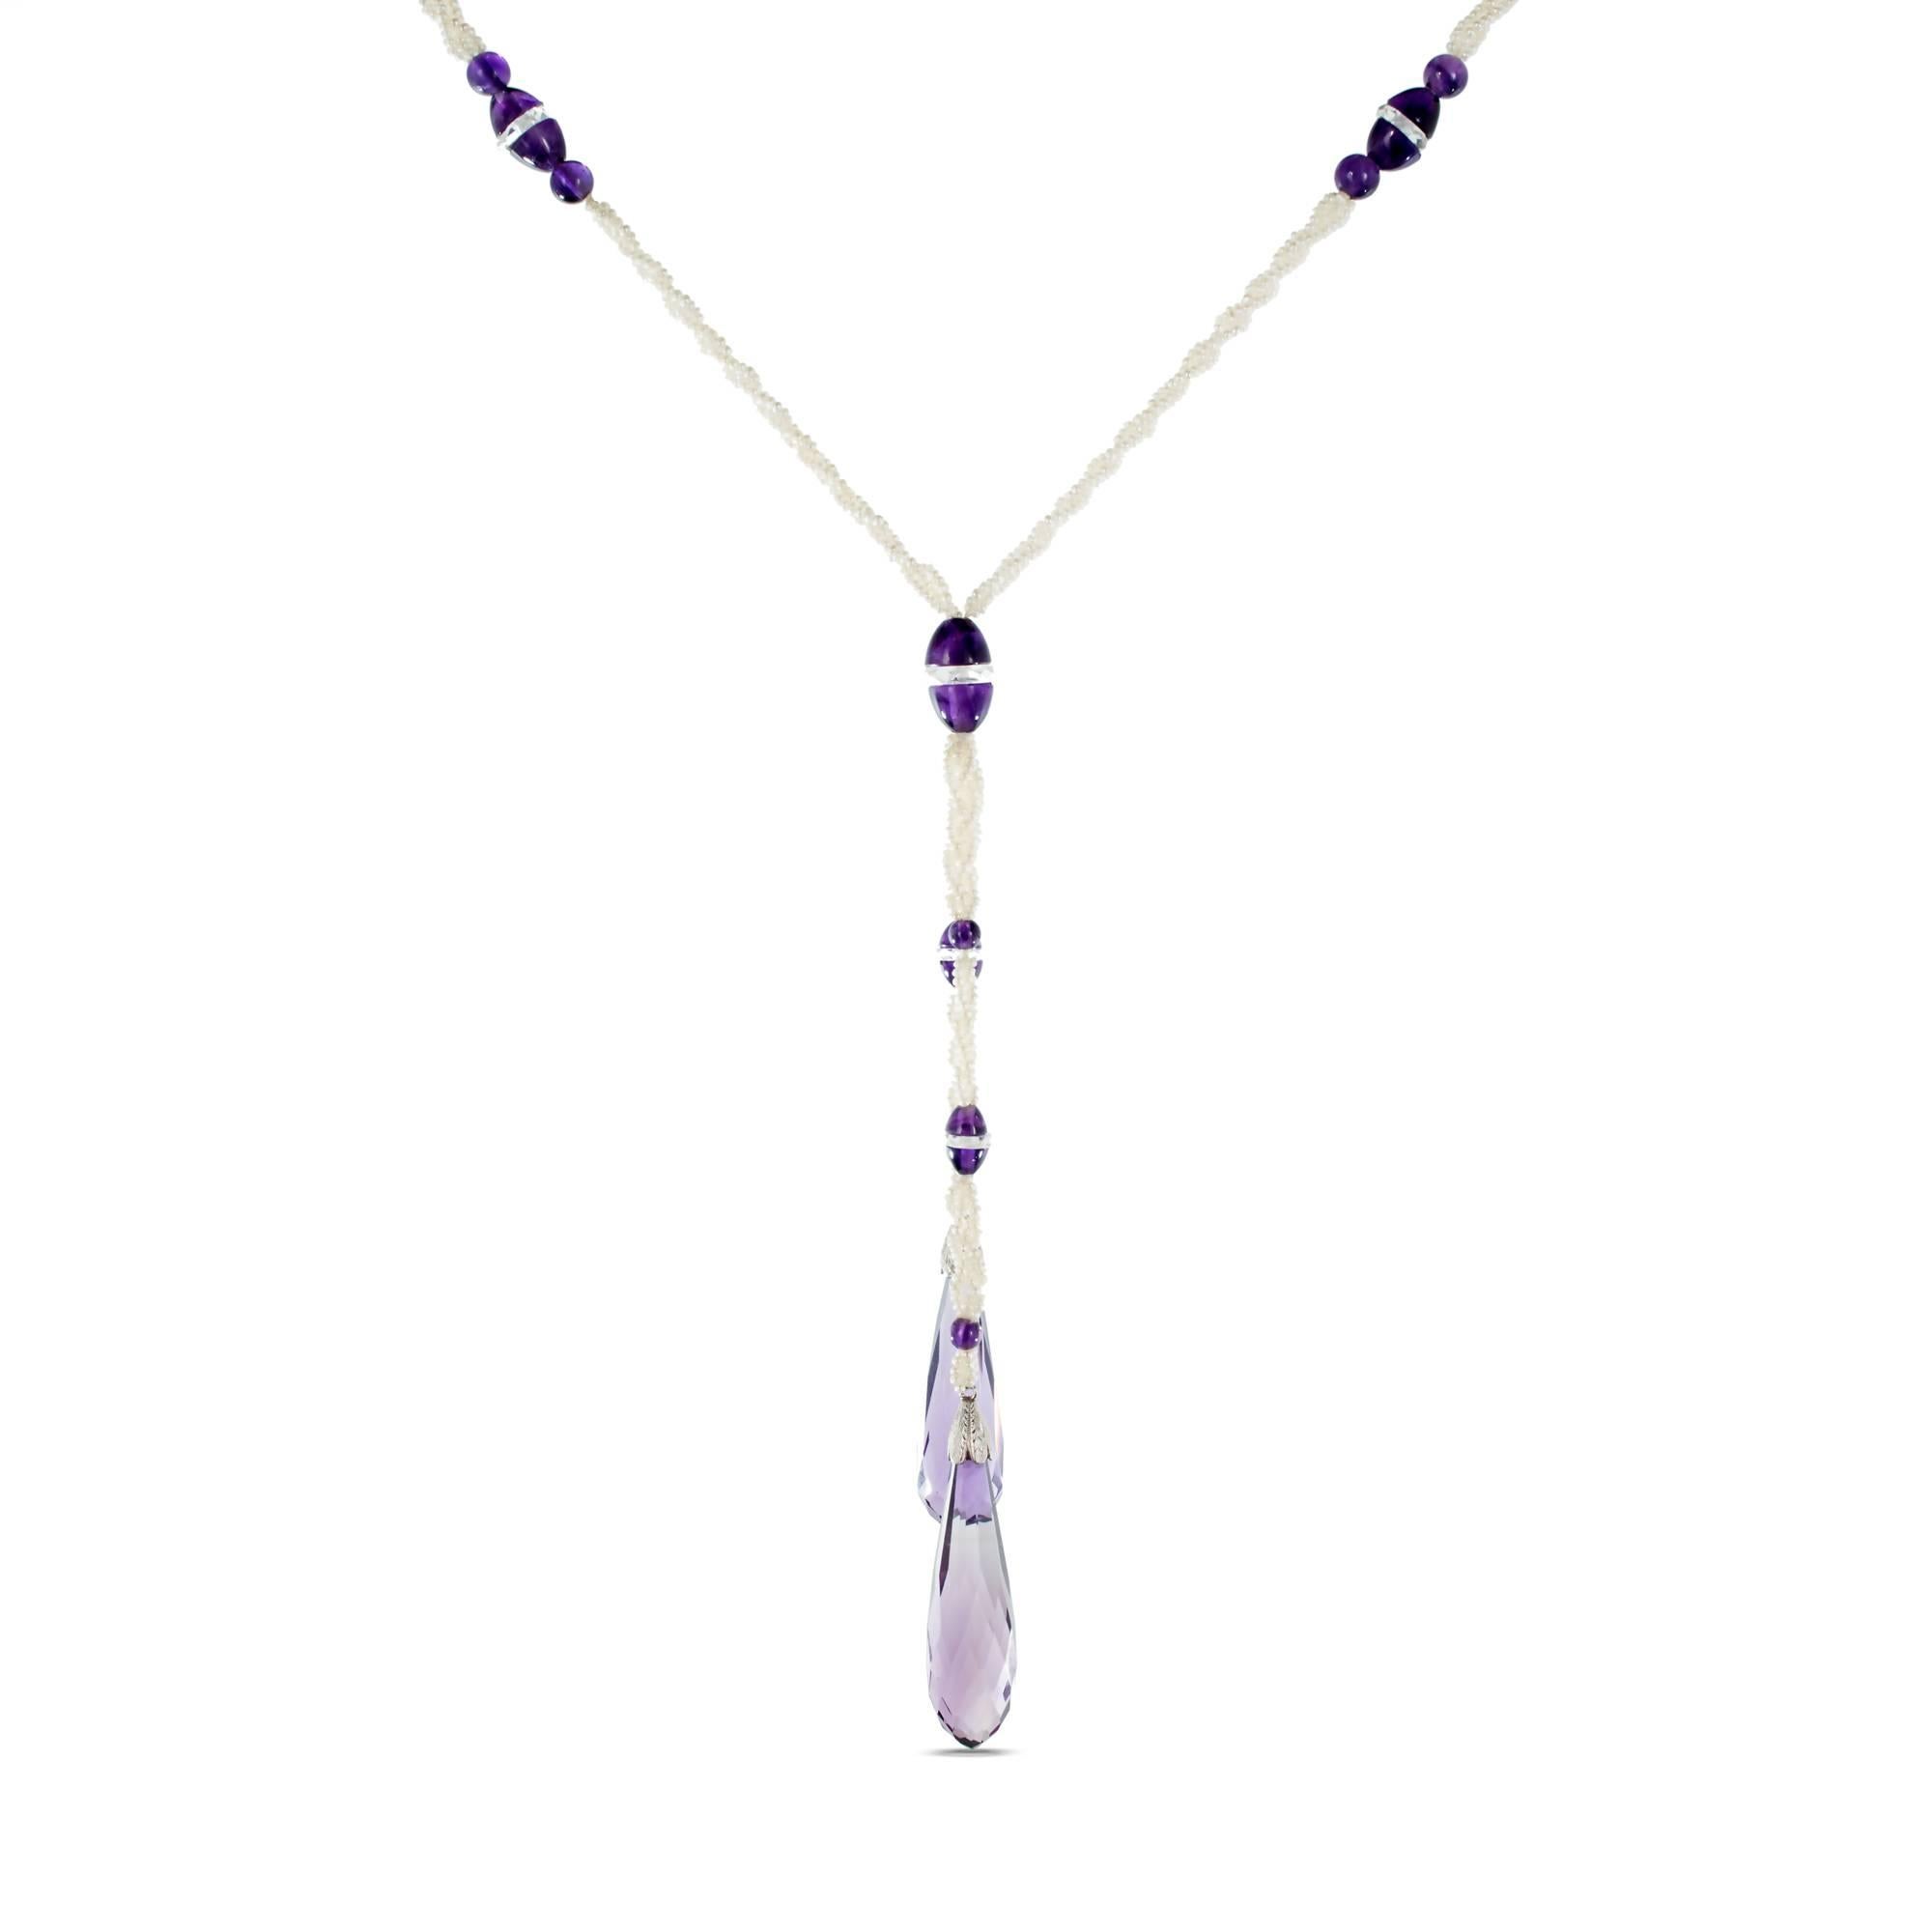 Long hand knotted natural seed pearl and natural Amethyst drop necklace. We estimate there are 2,500 natural pearls in the necklace. The range from 1.15 - 1.52mm. The GIA certifies the pearls as Pinctada species natural salt water pearls, no